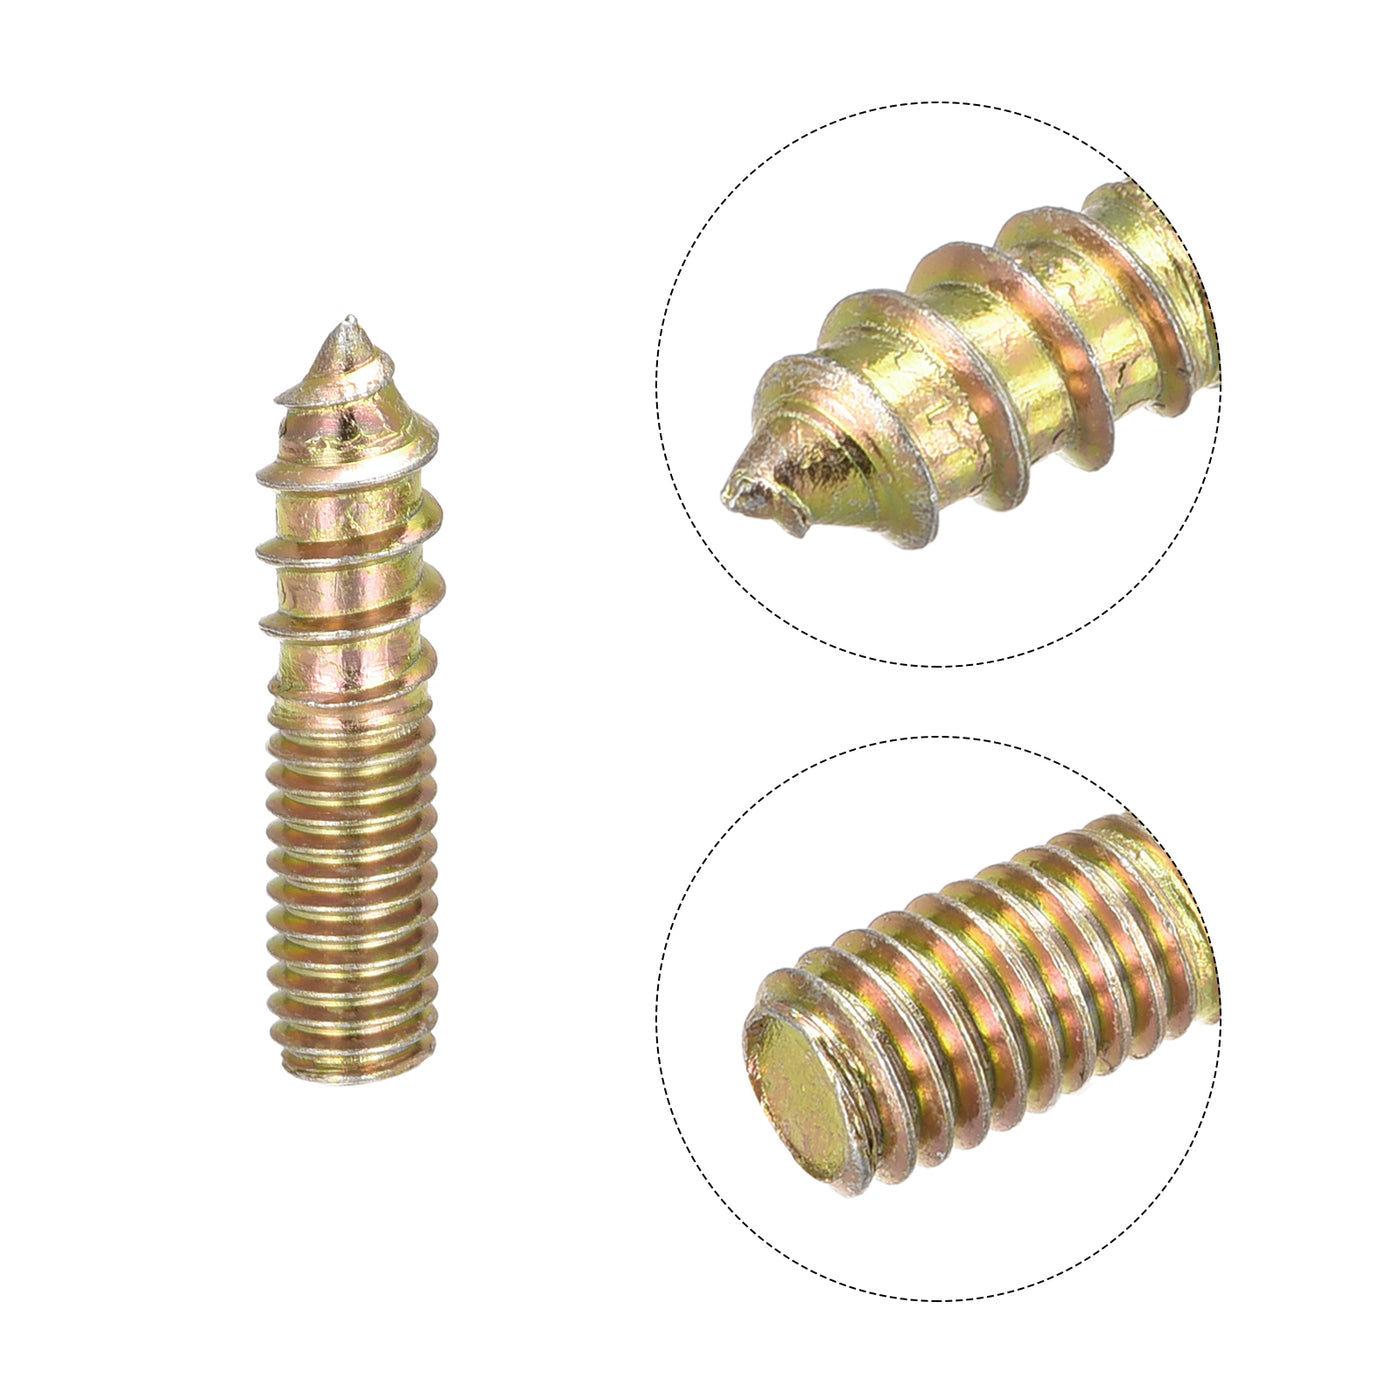 Uxcell Uxcell M6x25mm Hanger Bolts, 20pcs Double Ended Thread Dowel Screws for Wood Furniture